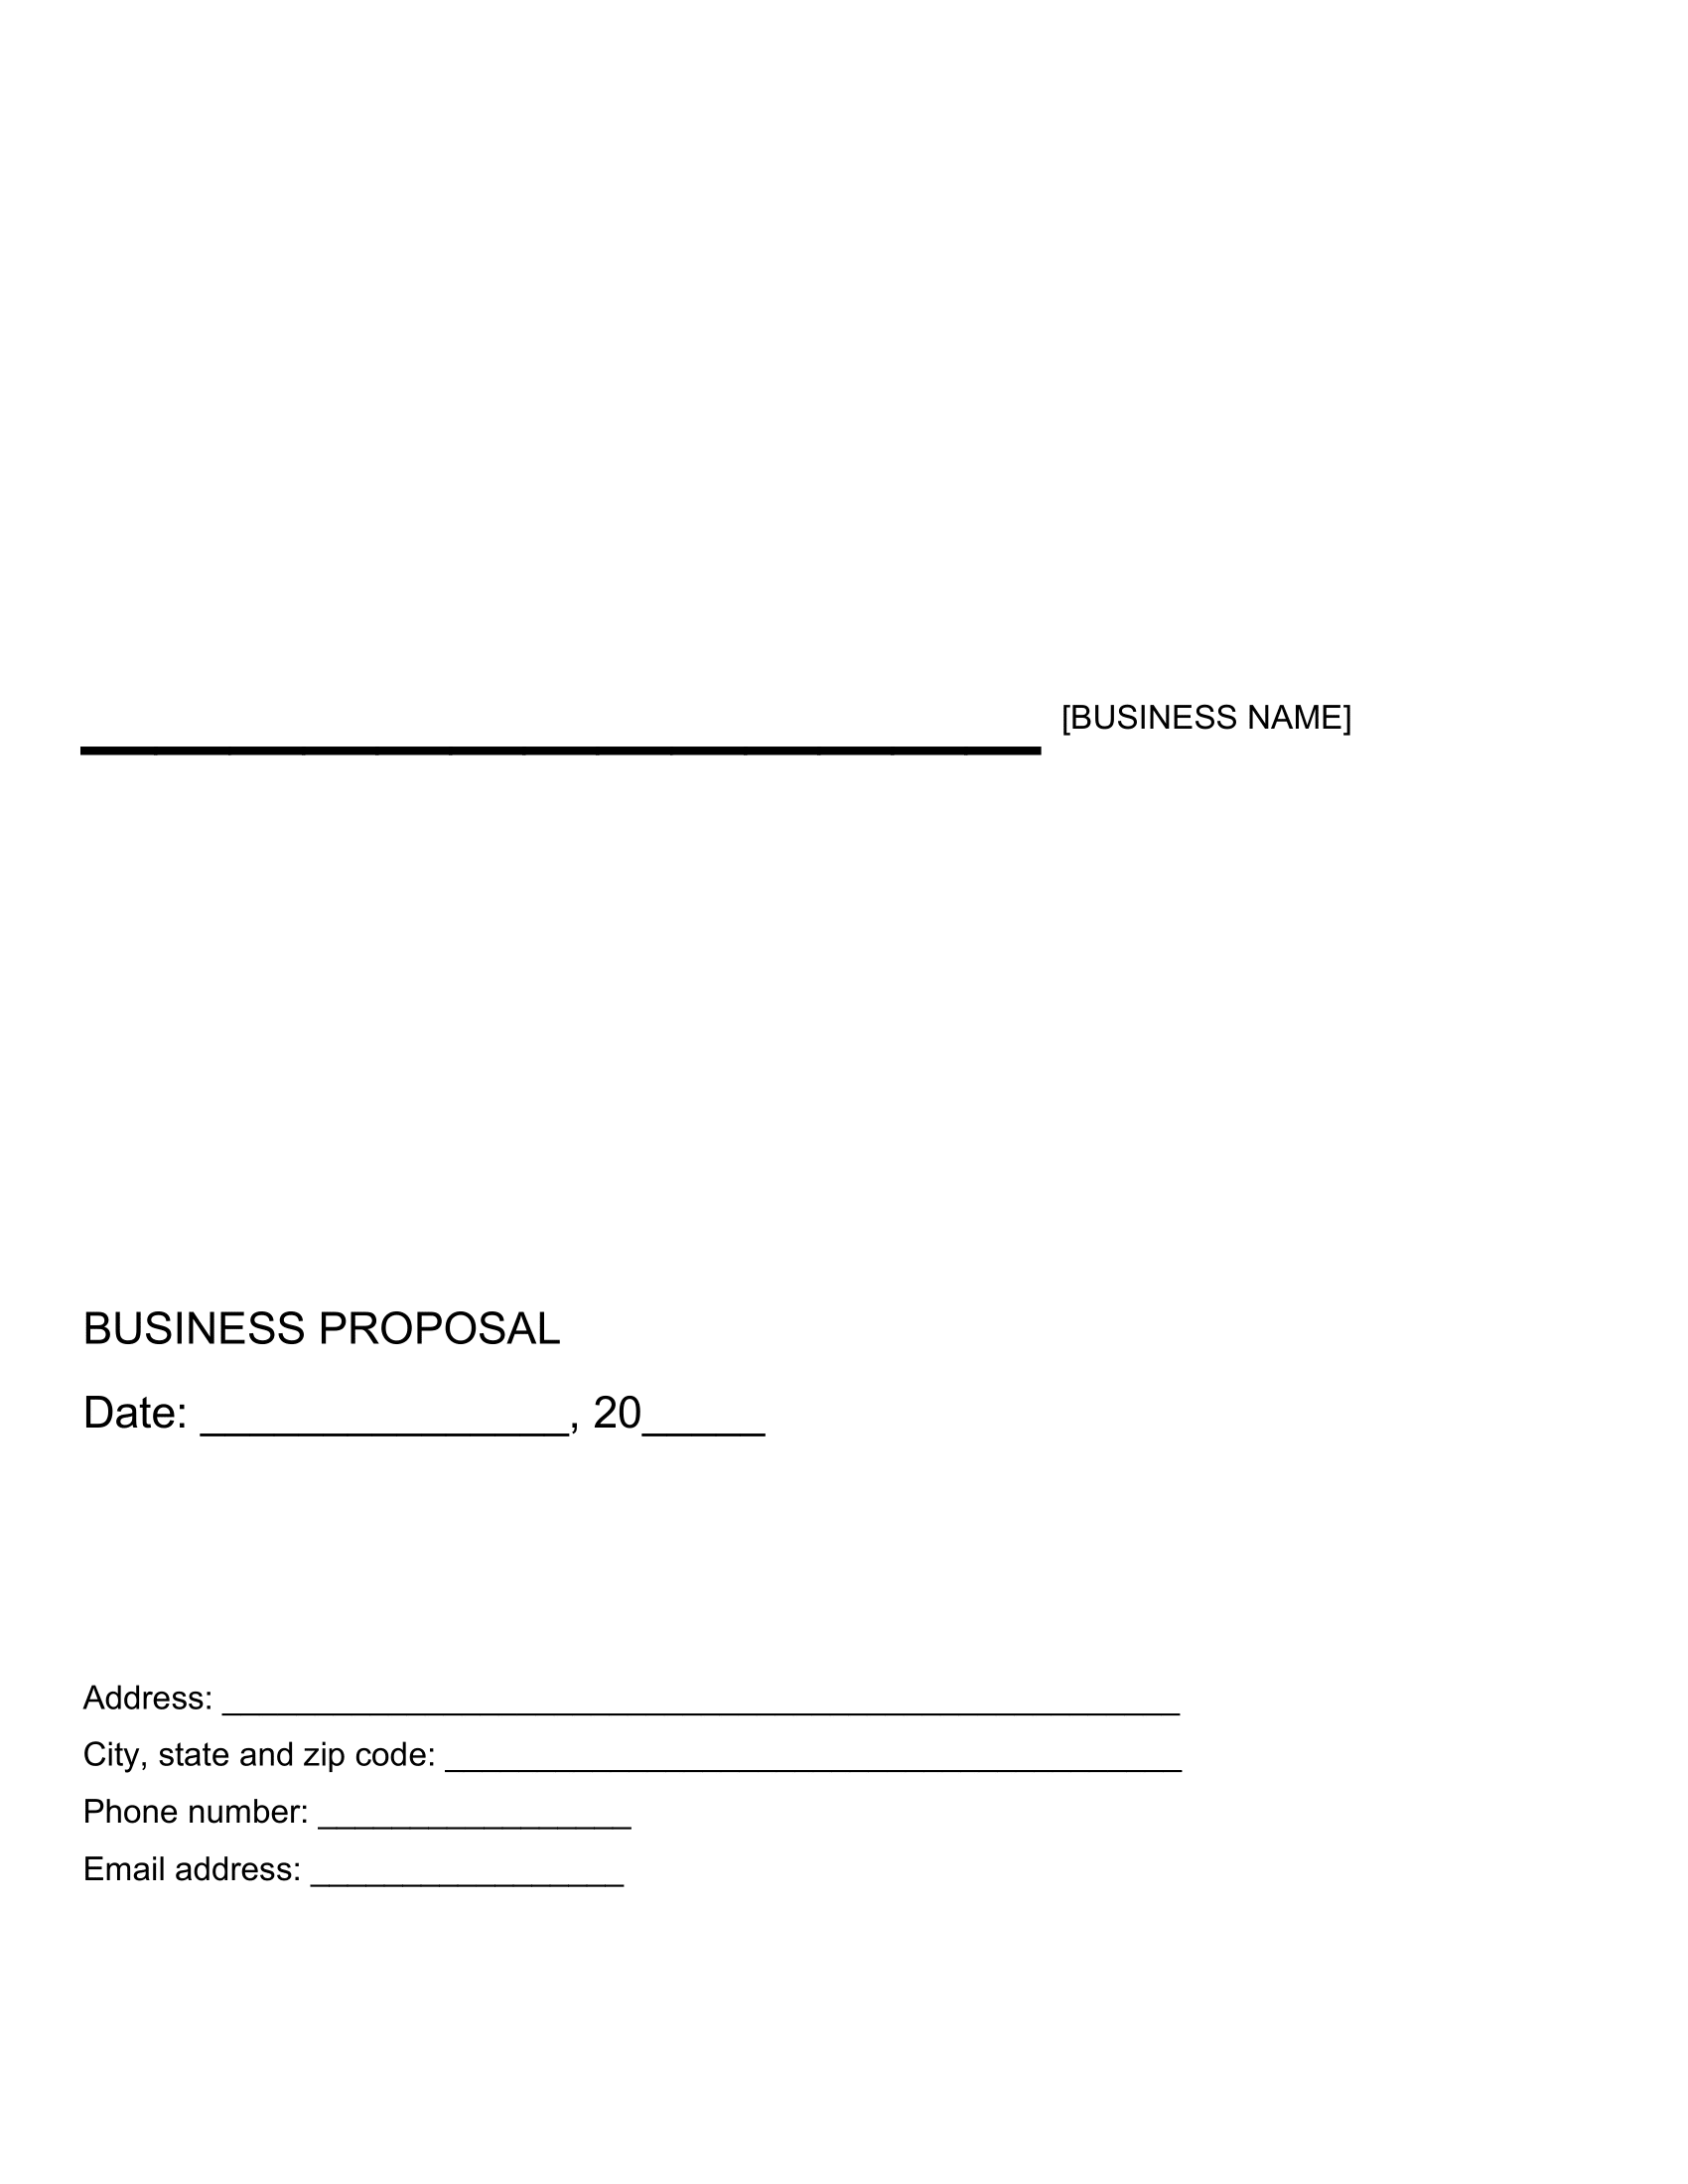 business proposal template